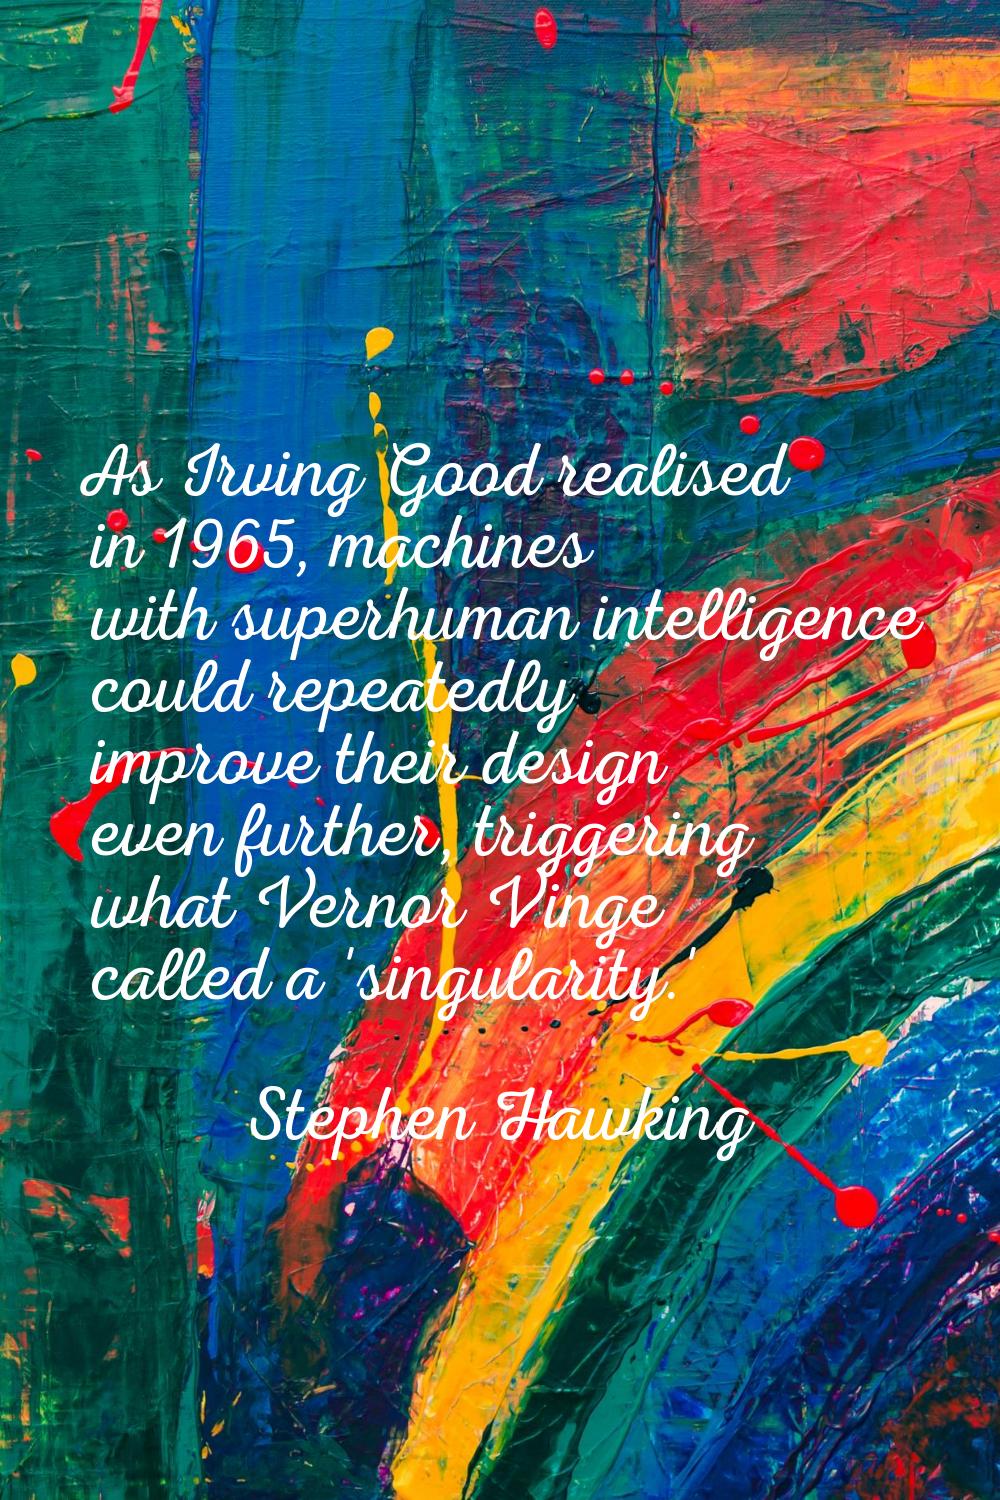 As Irving Good realised in 1965, machines with superhuman intelligence could repeatedly improve the